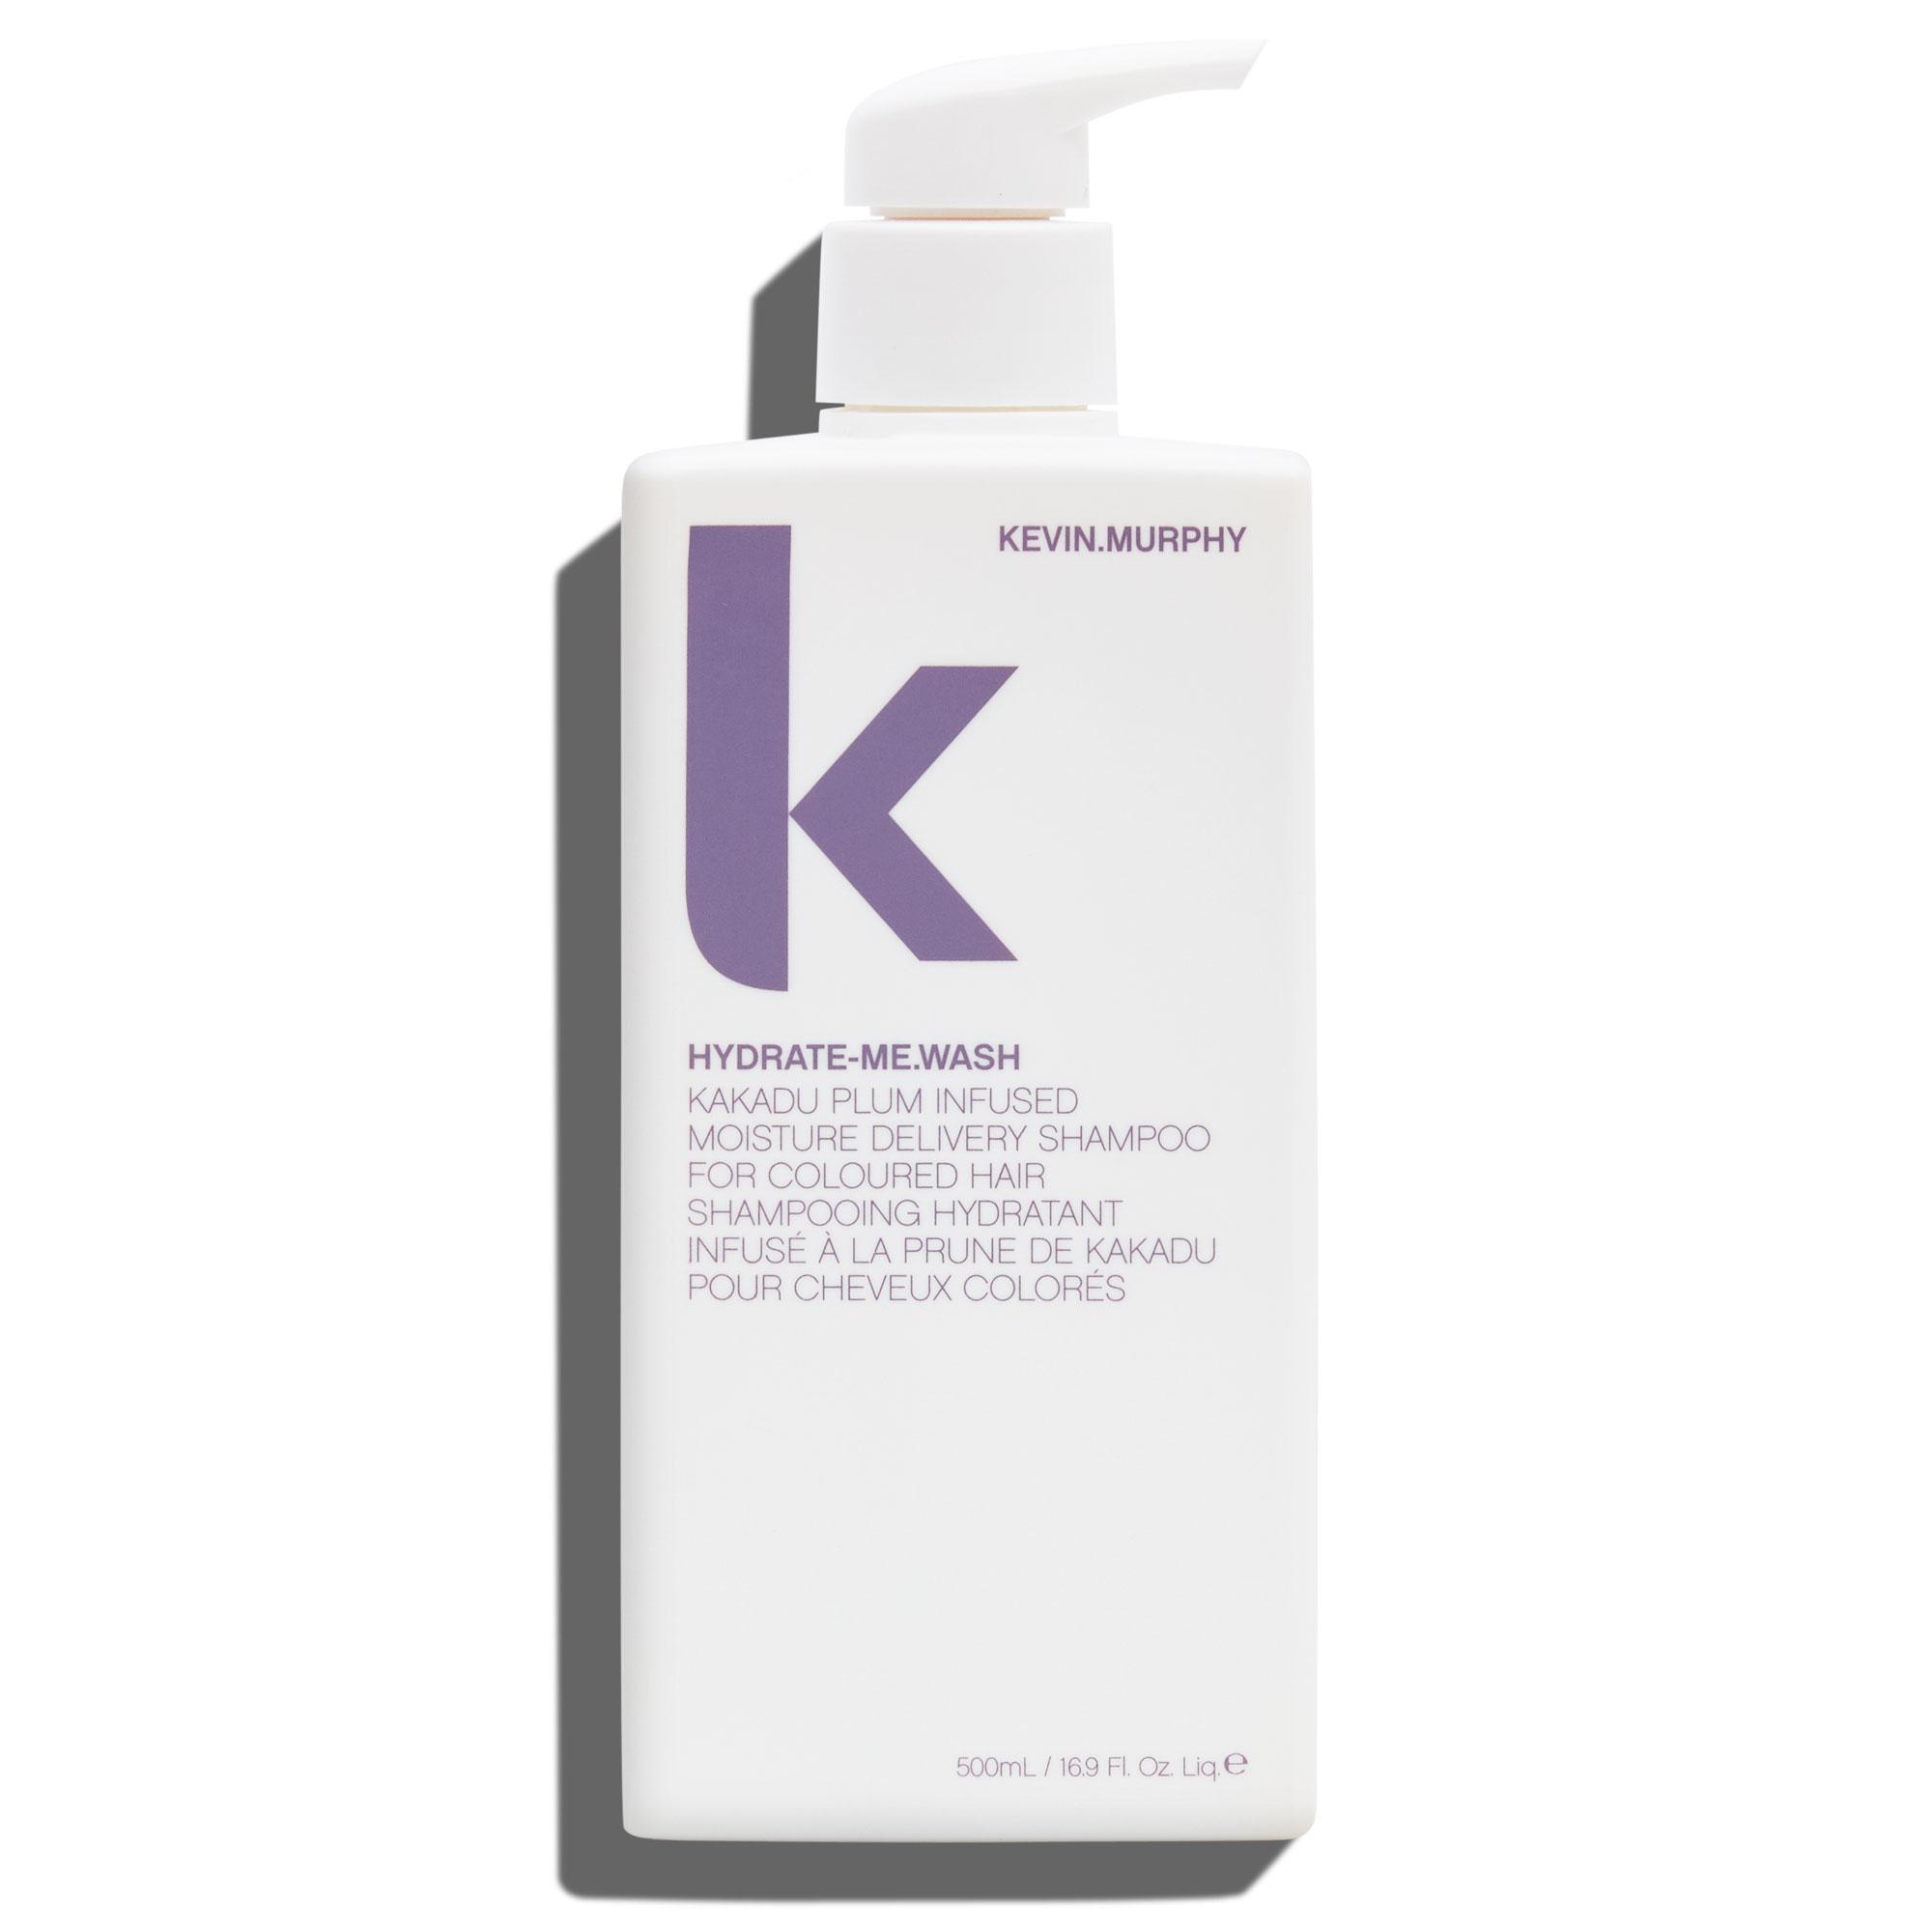 KEVIN.MURPHY HYDRATE-ME.WASH (Limited Edition) .5liter